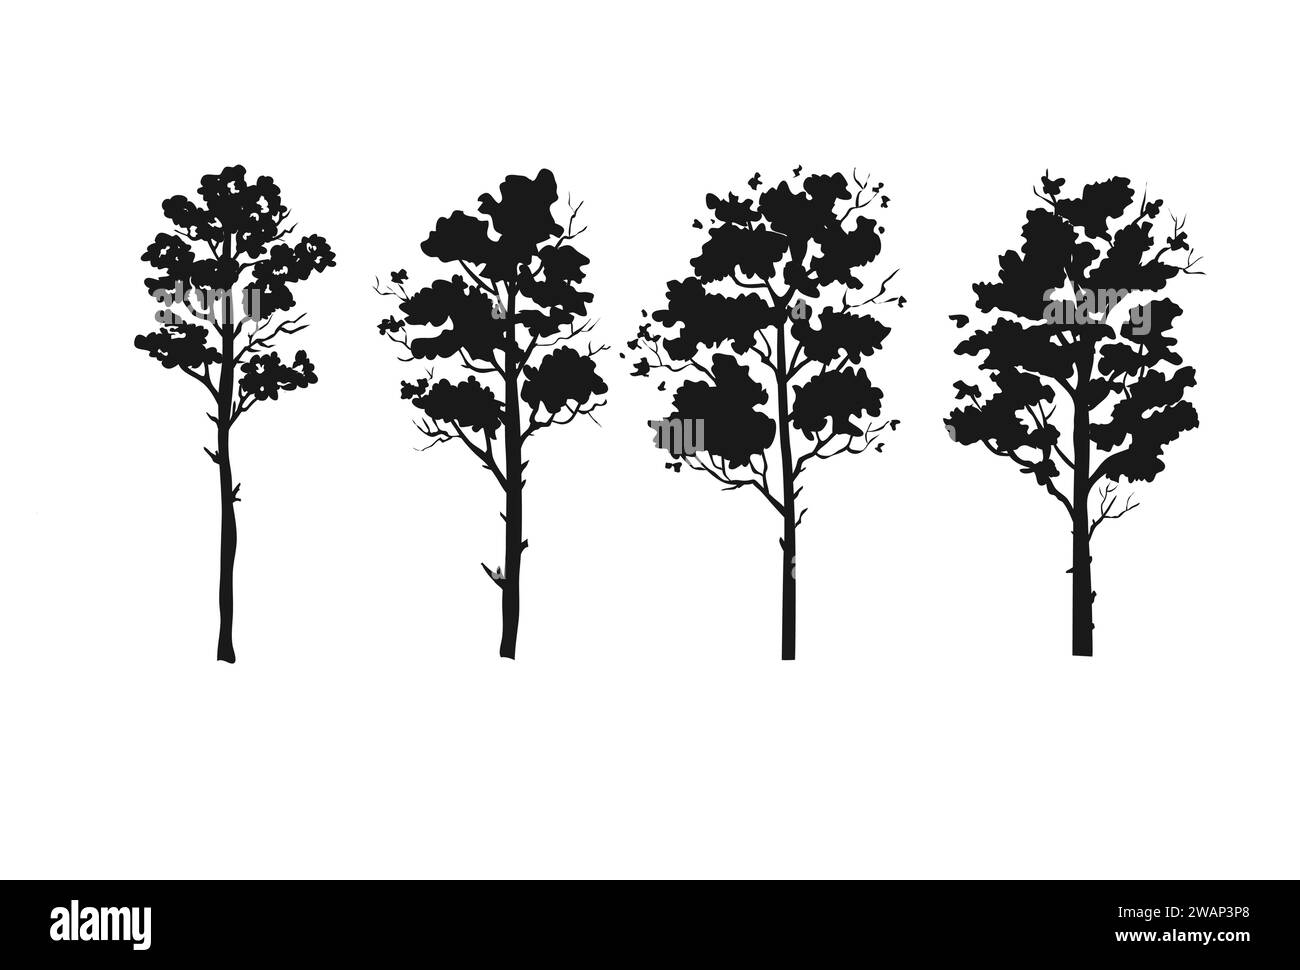 Set of forest trees silhouettes vector illustration Stock Vector